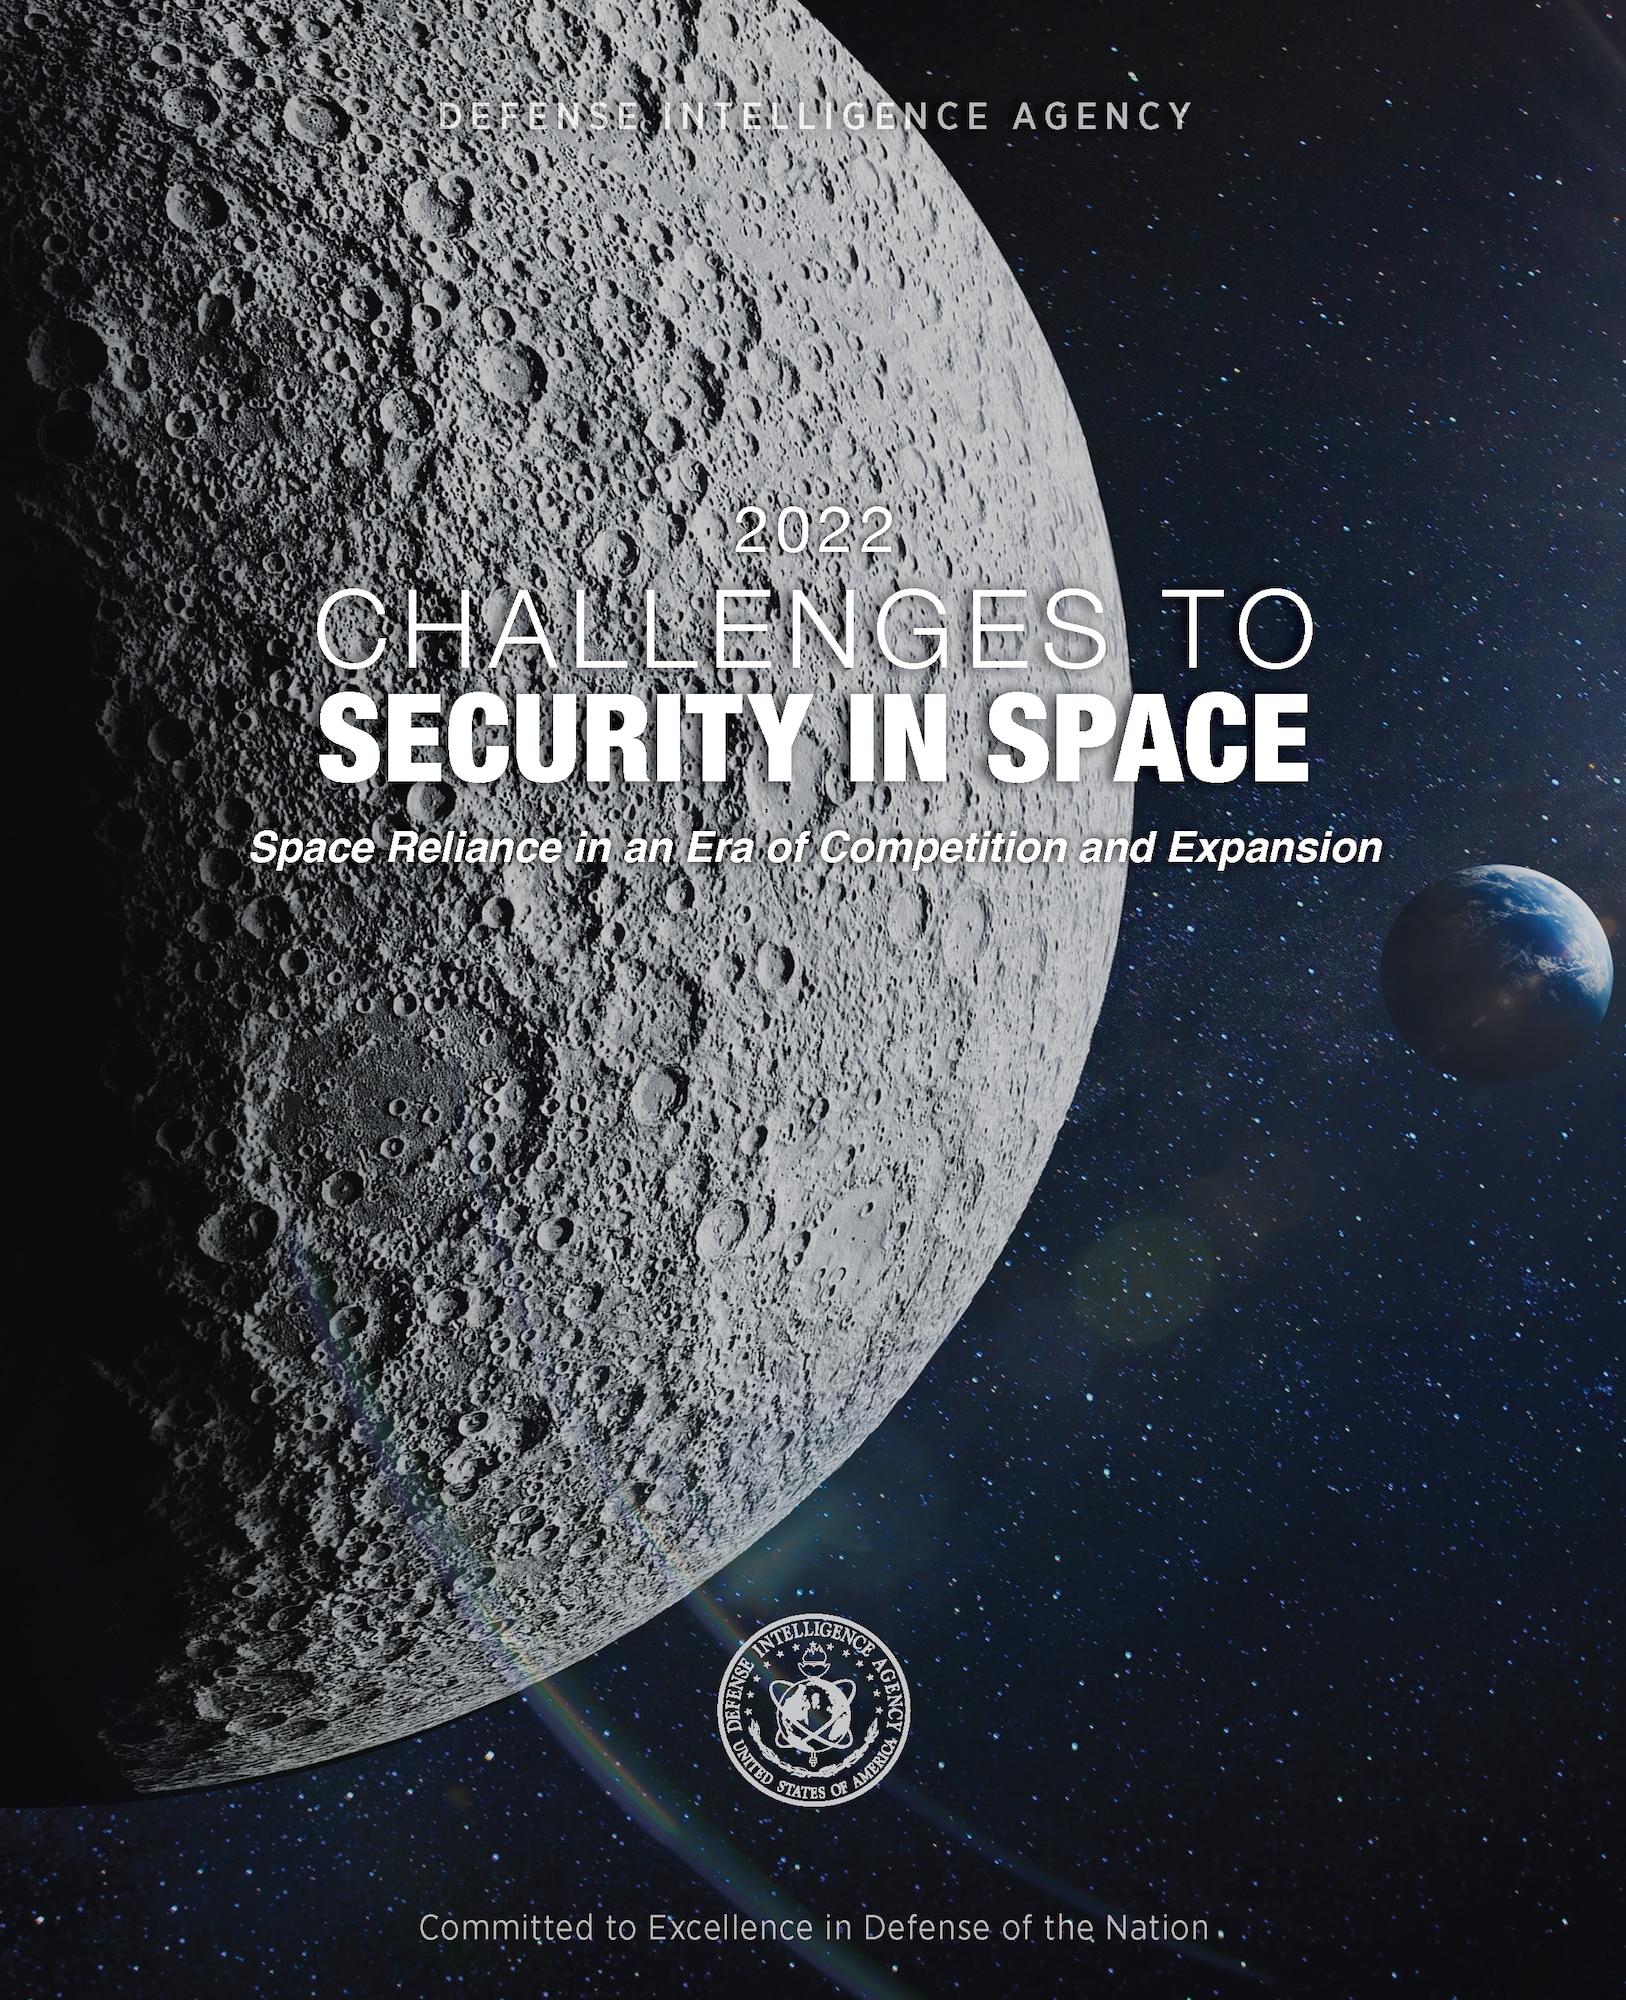 DIA- CHALLENGES TO SECURITY IN SPACE